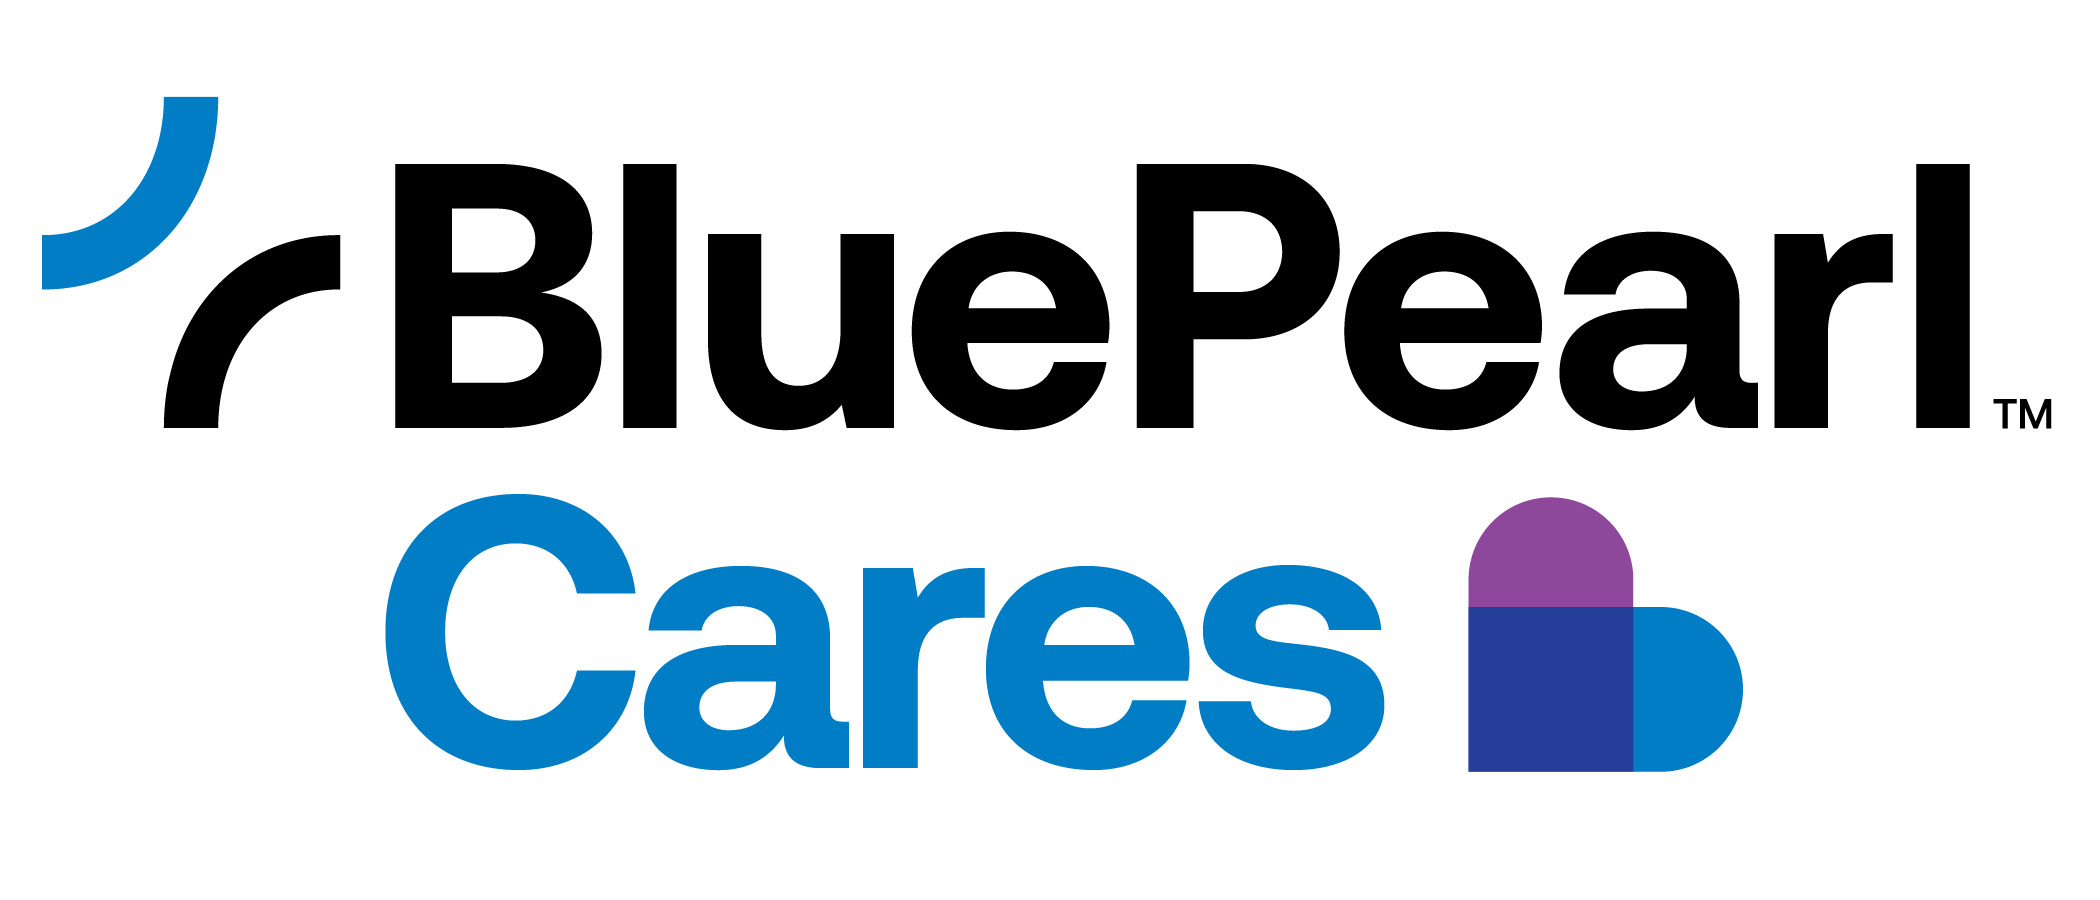 BluePearl Cares logo featuring a blue and purple heart